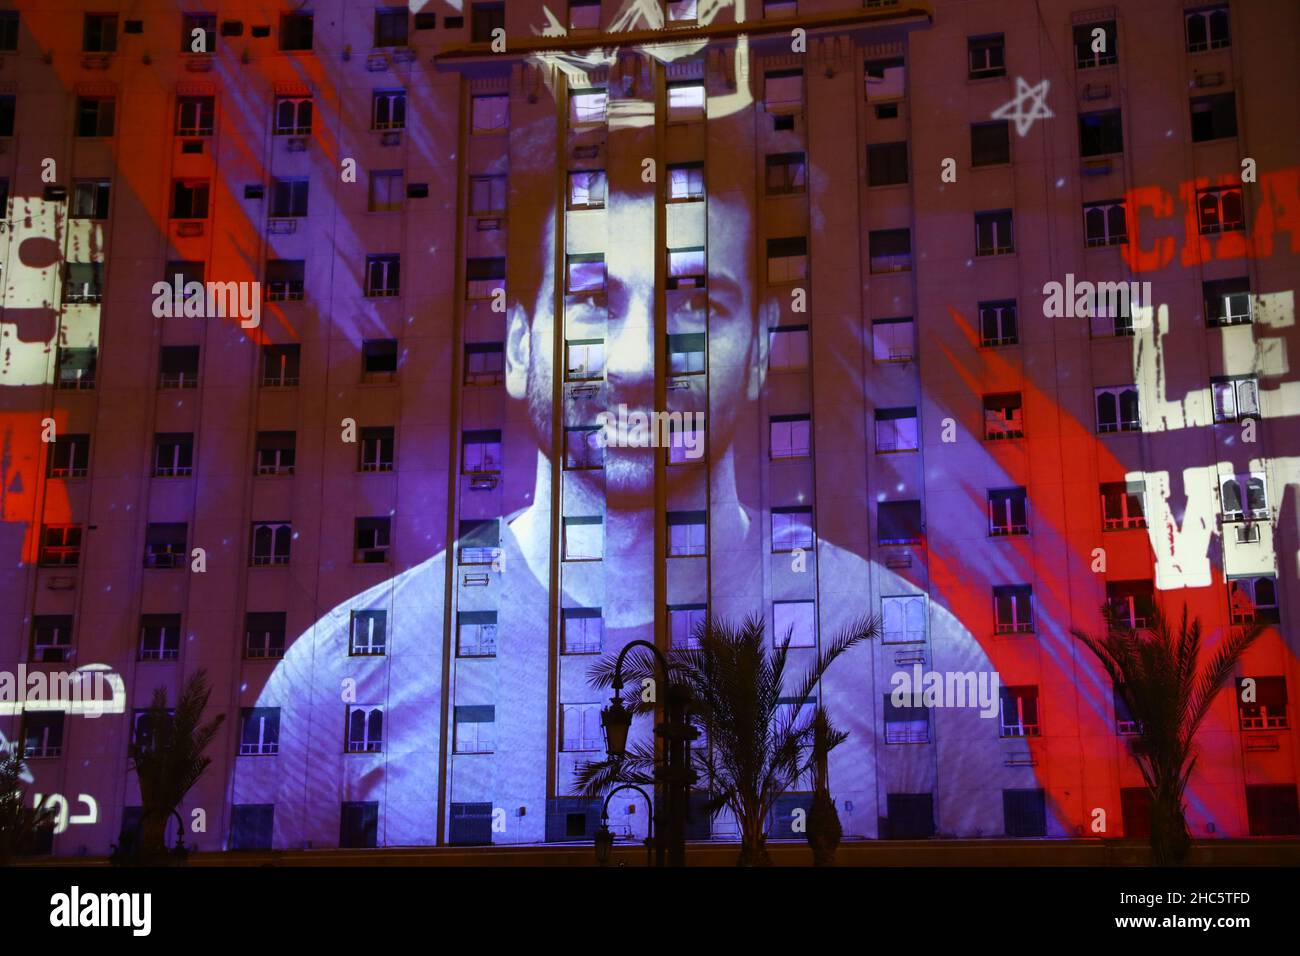 Cairo. 24th Dec, 2021. Photo taken on Dec. 24, 2021 shows the 3D mapping of Egyptian professional footballer Mohamed Salah on Tahrir Complex building in Cairo, Egypt. The mapping show held on Friday night exhibited Mohamed Salah's some most remarkable achievements, such as breaking England's football score record with his 100 goals, winning the Champions League in 2019 and his recognition as the 1st Player in Africa. Salah is an Egyptian professional footballer who captains Egypt national football team and plays for Liverpool Football Club. Credit: Ahmed Gomaa/Xinhua/Alamy Live News Stock Photo